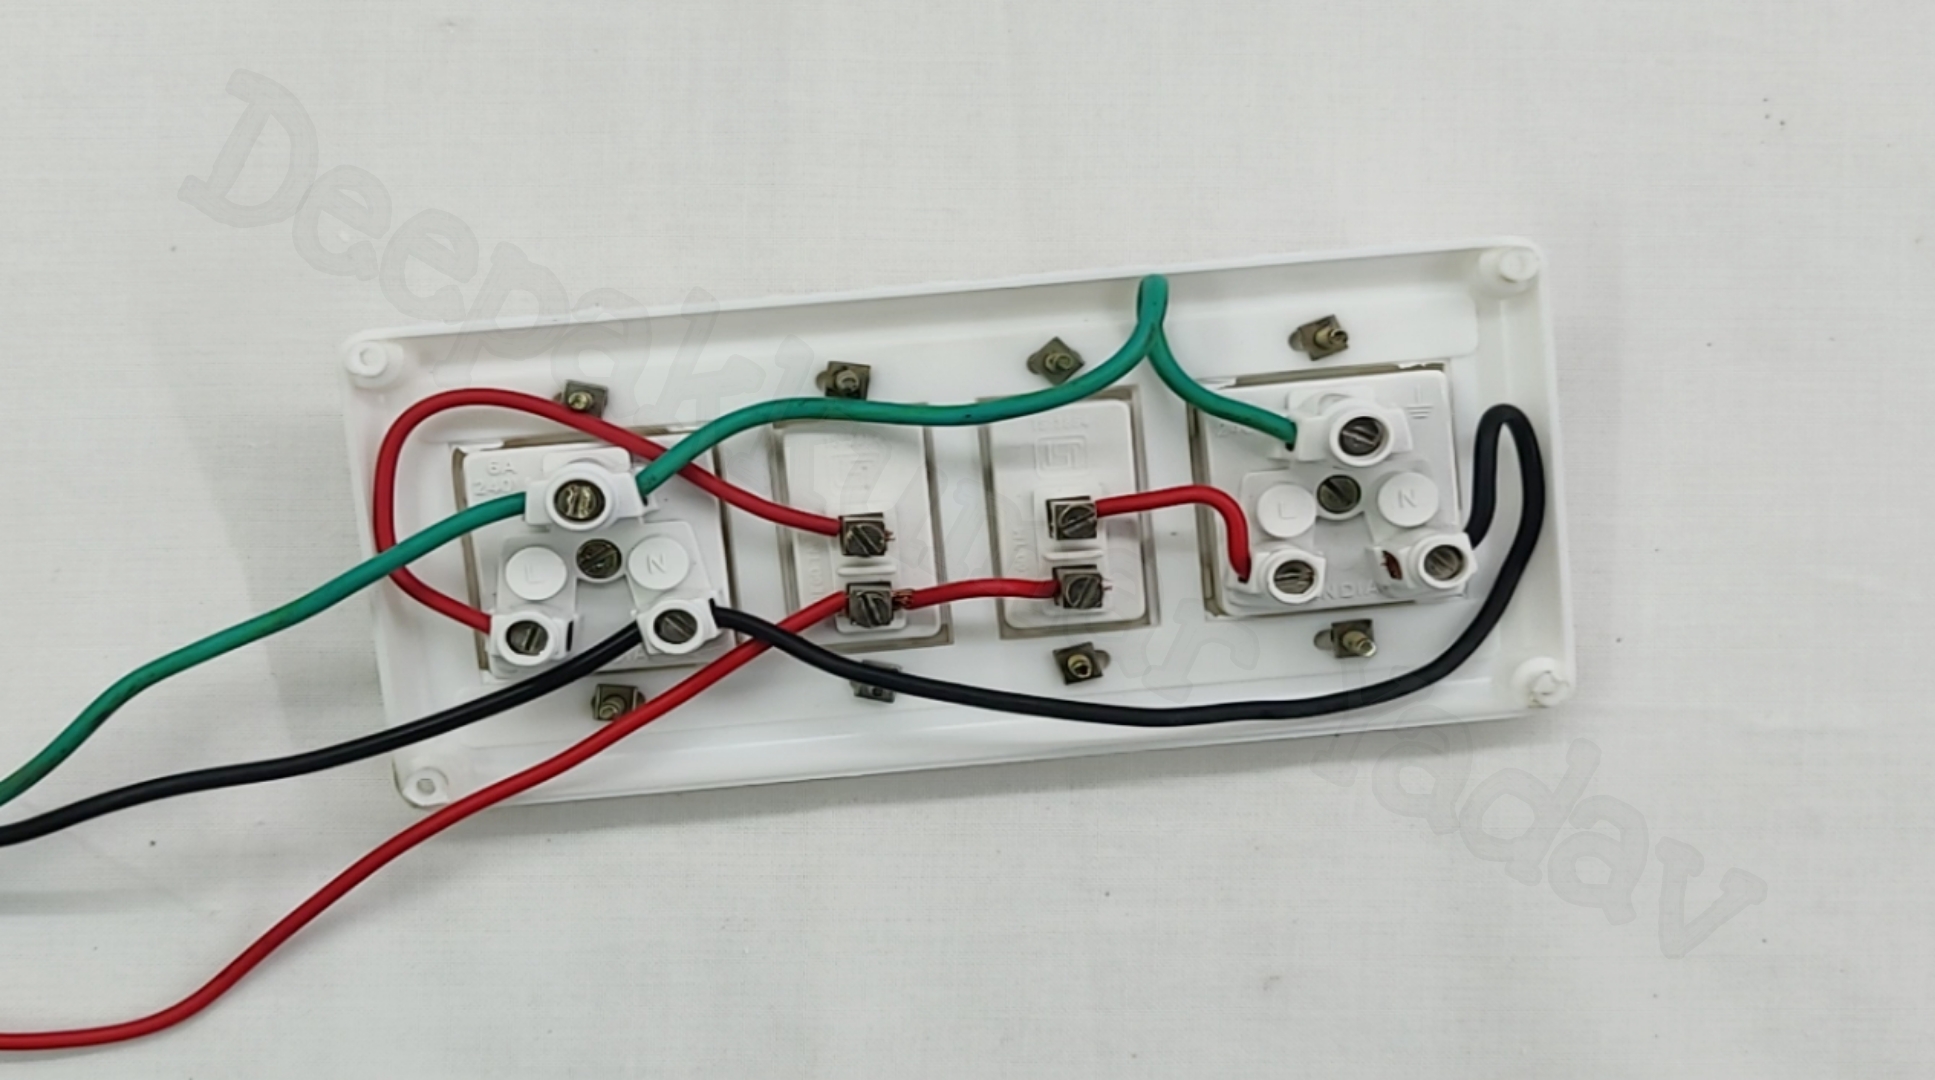 How to Make Electric Extension Board at Home